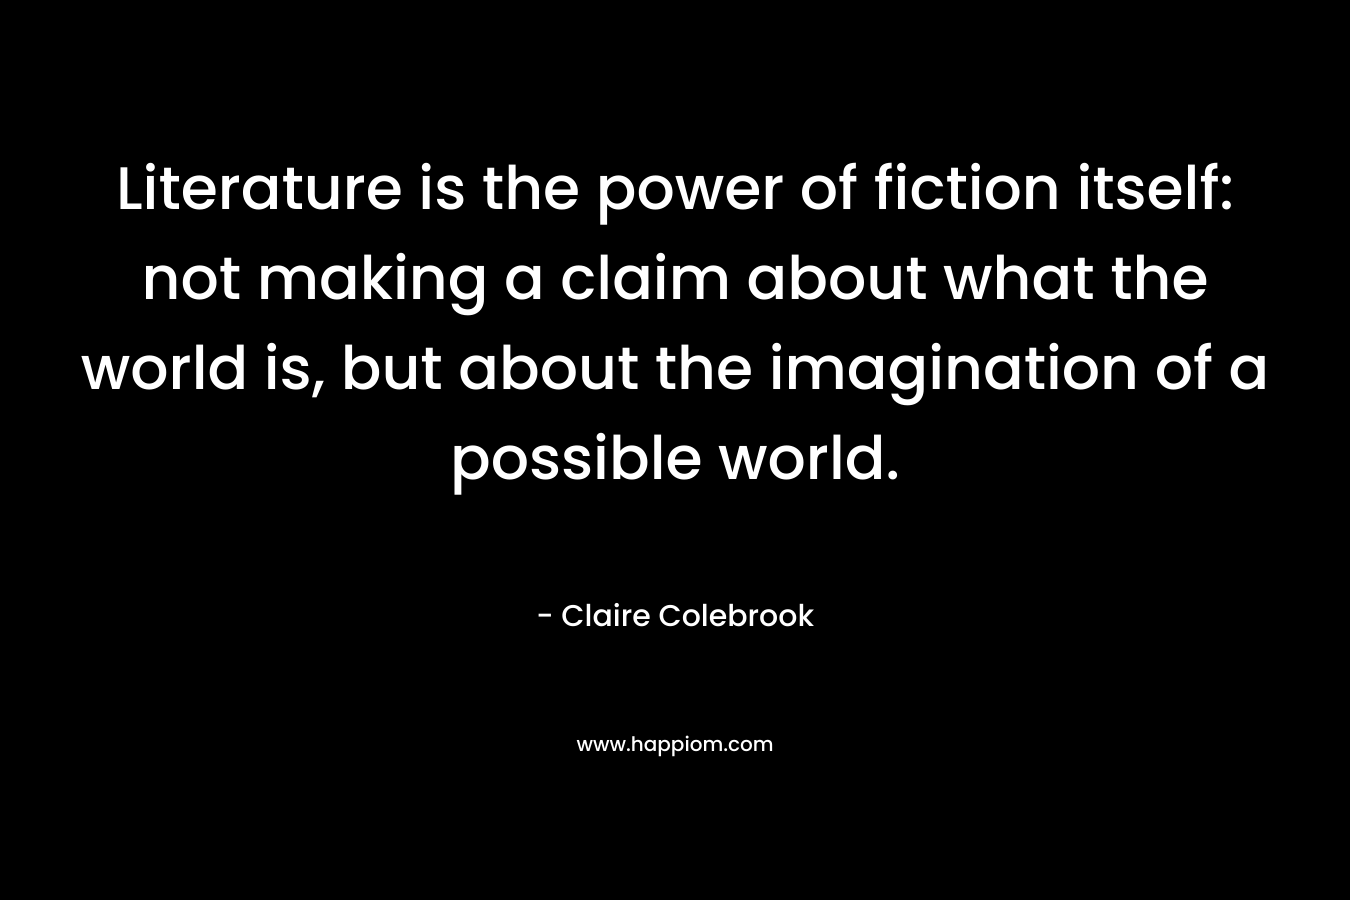 Literature is the power of fiction itself: not making a claim about what the world is, but about the imagination of a possible world. – Claire Colebrook